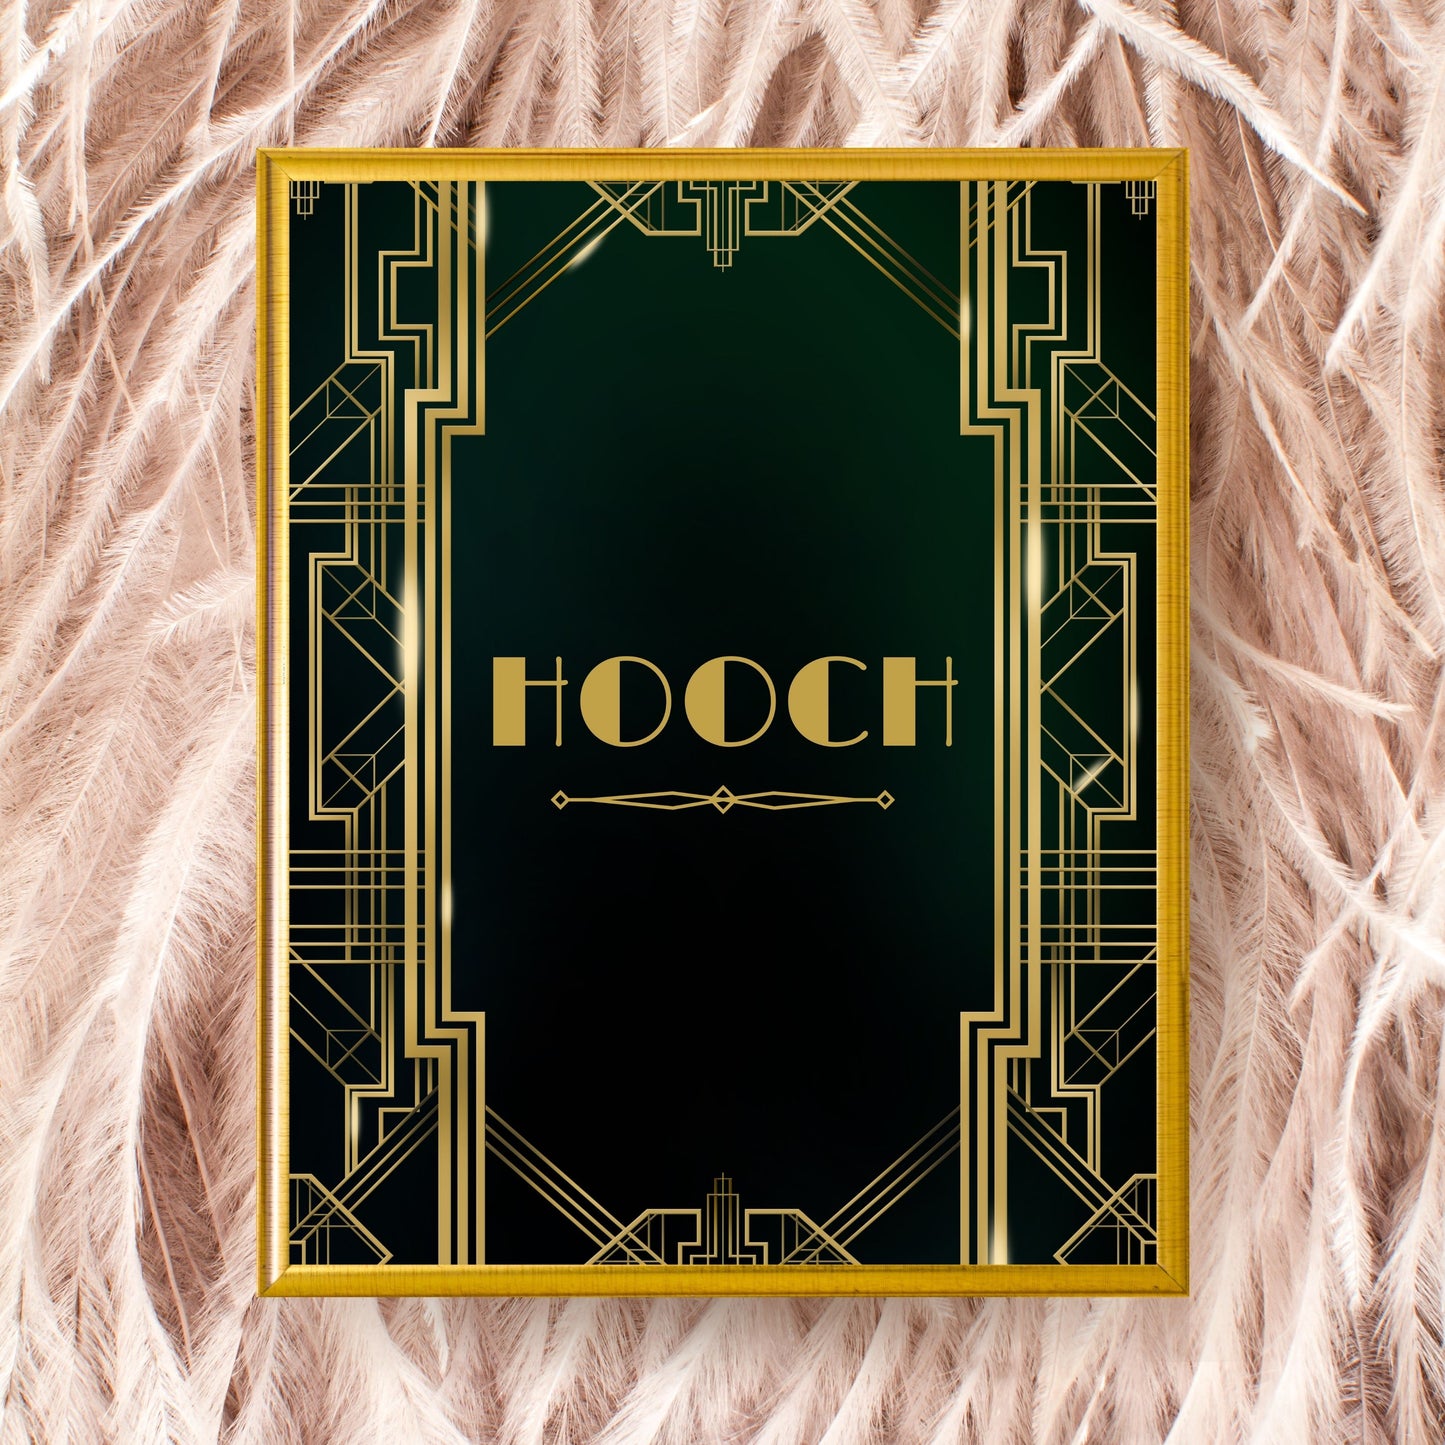 "Hooch" Art Deco Printable Party Sign For Great Gatsby or Roaring 20's Party Or Wedding, Black & Gold, Printable Party Decor